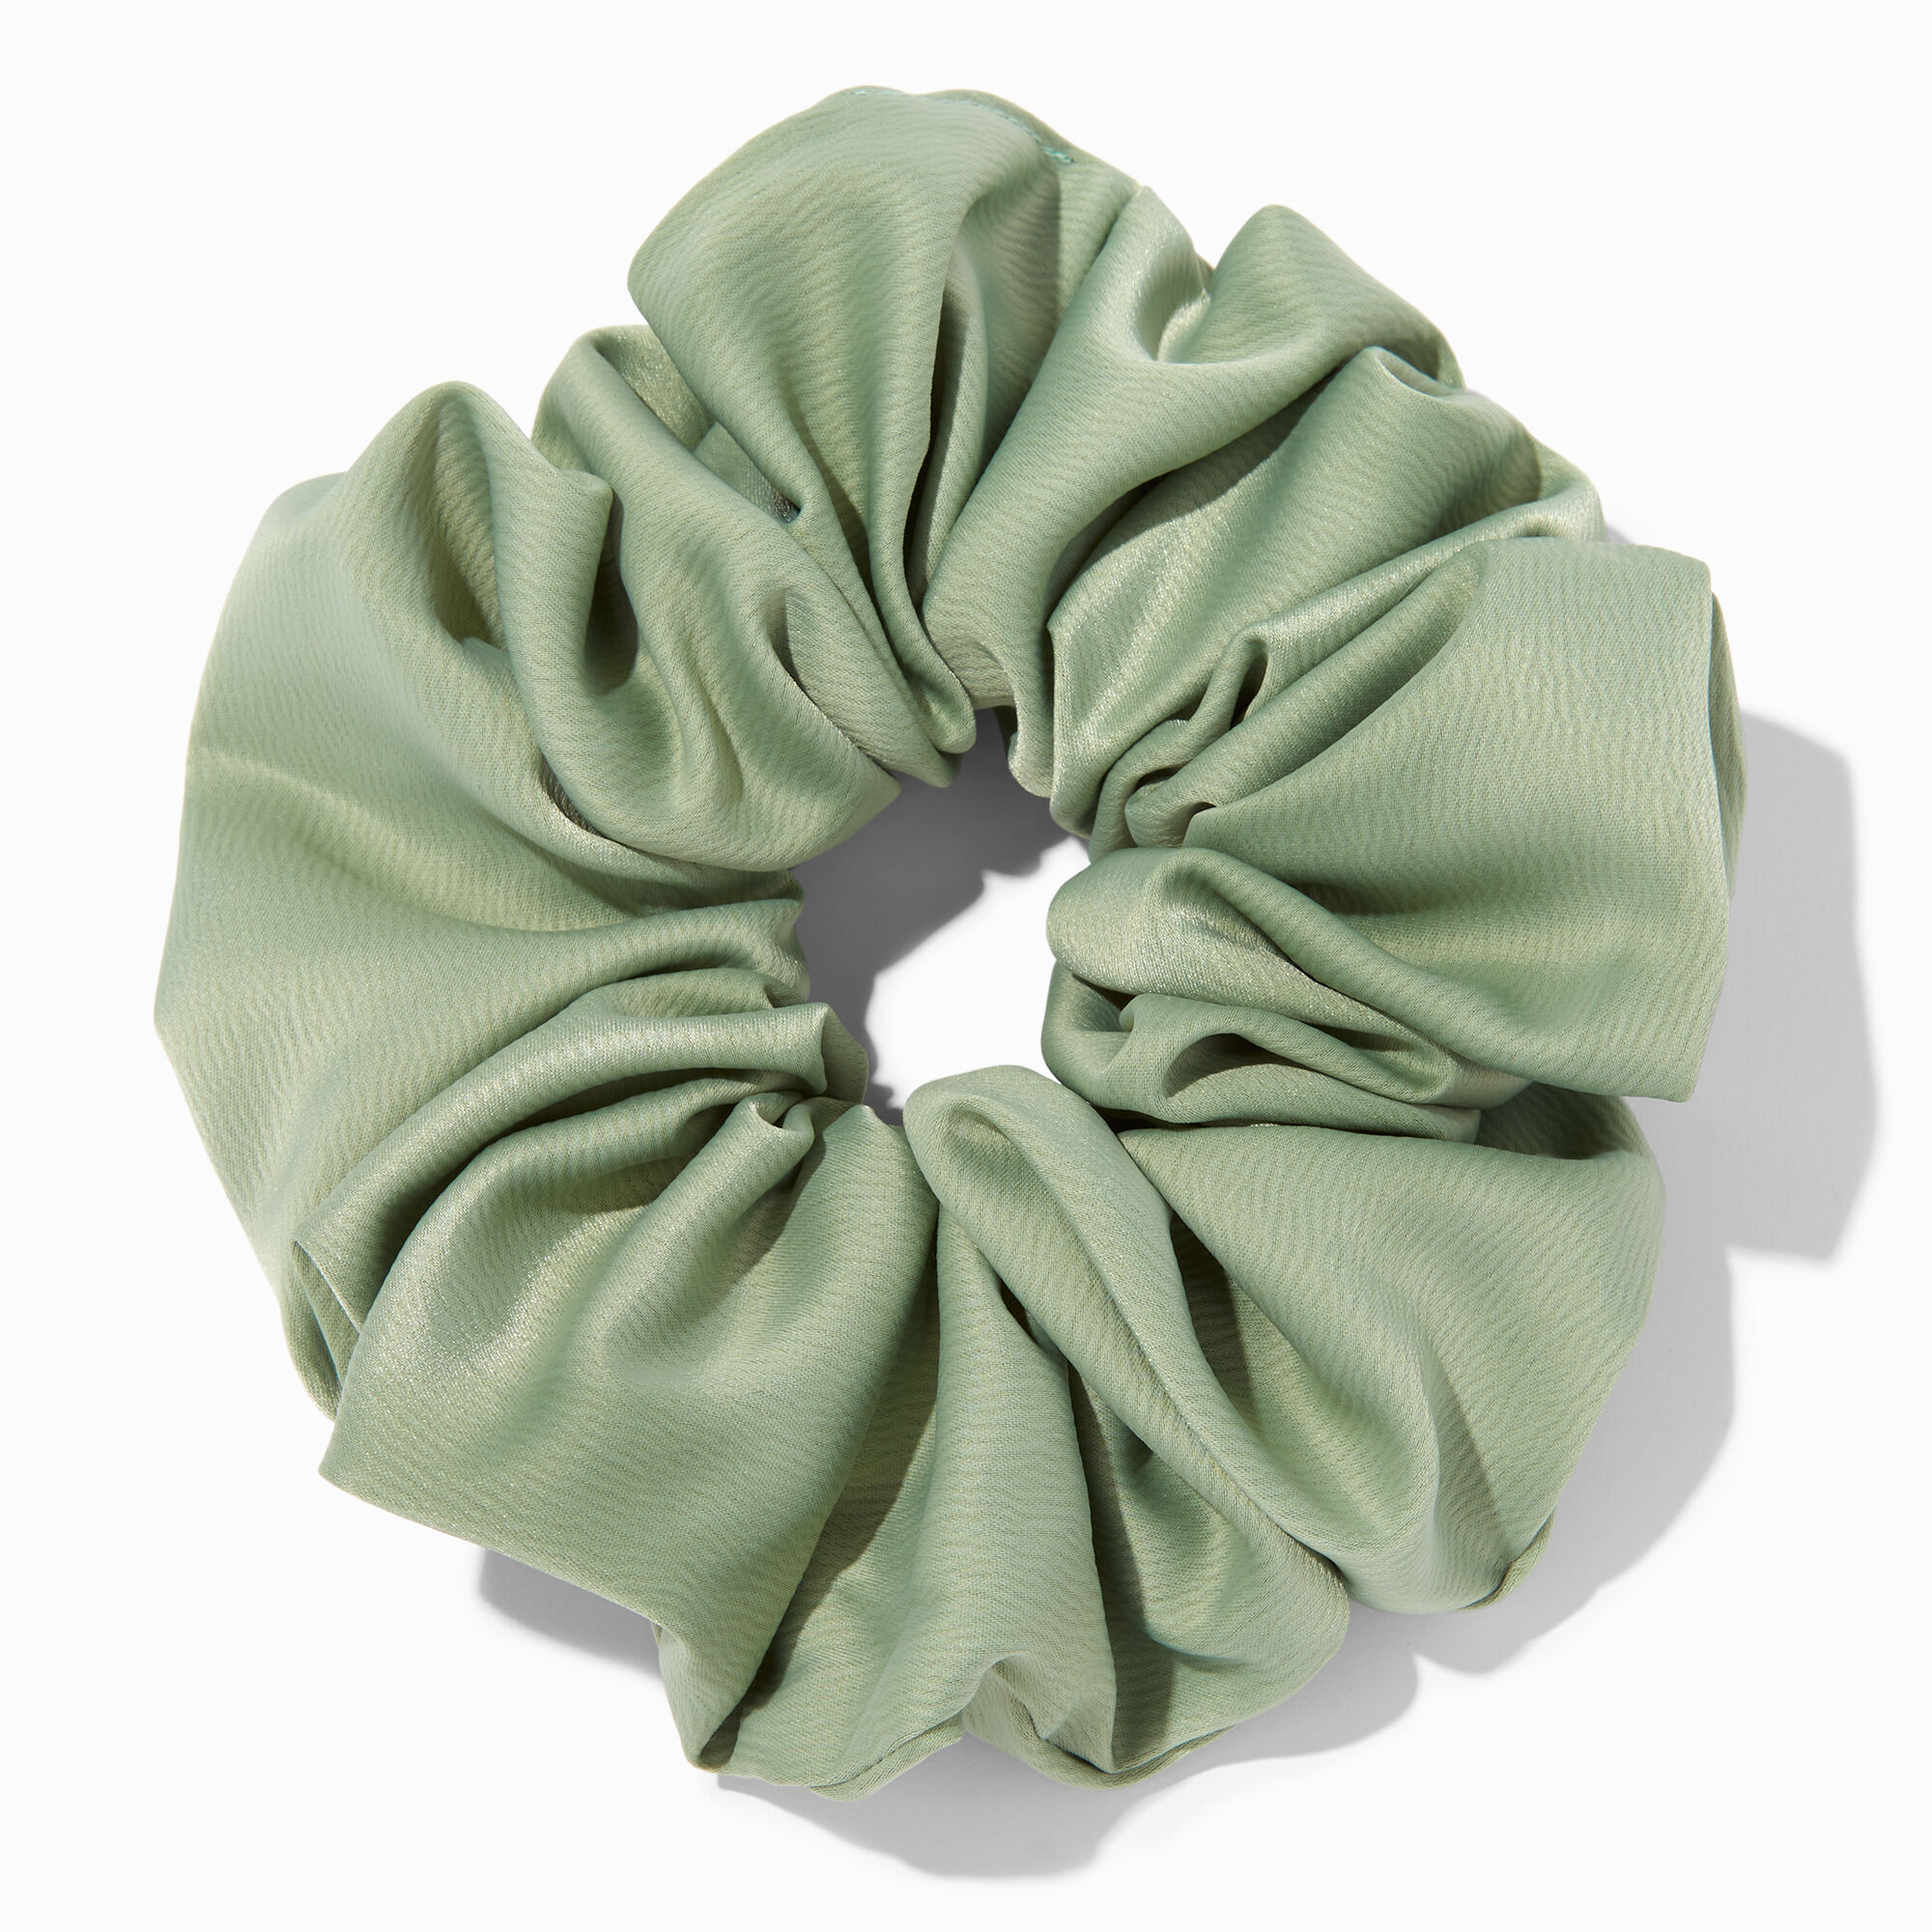 View Claires Giant Silky Sage Hair Scrunchie Bracelet Green information